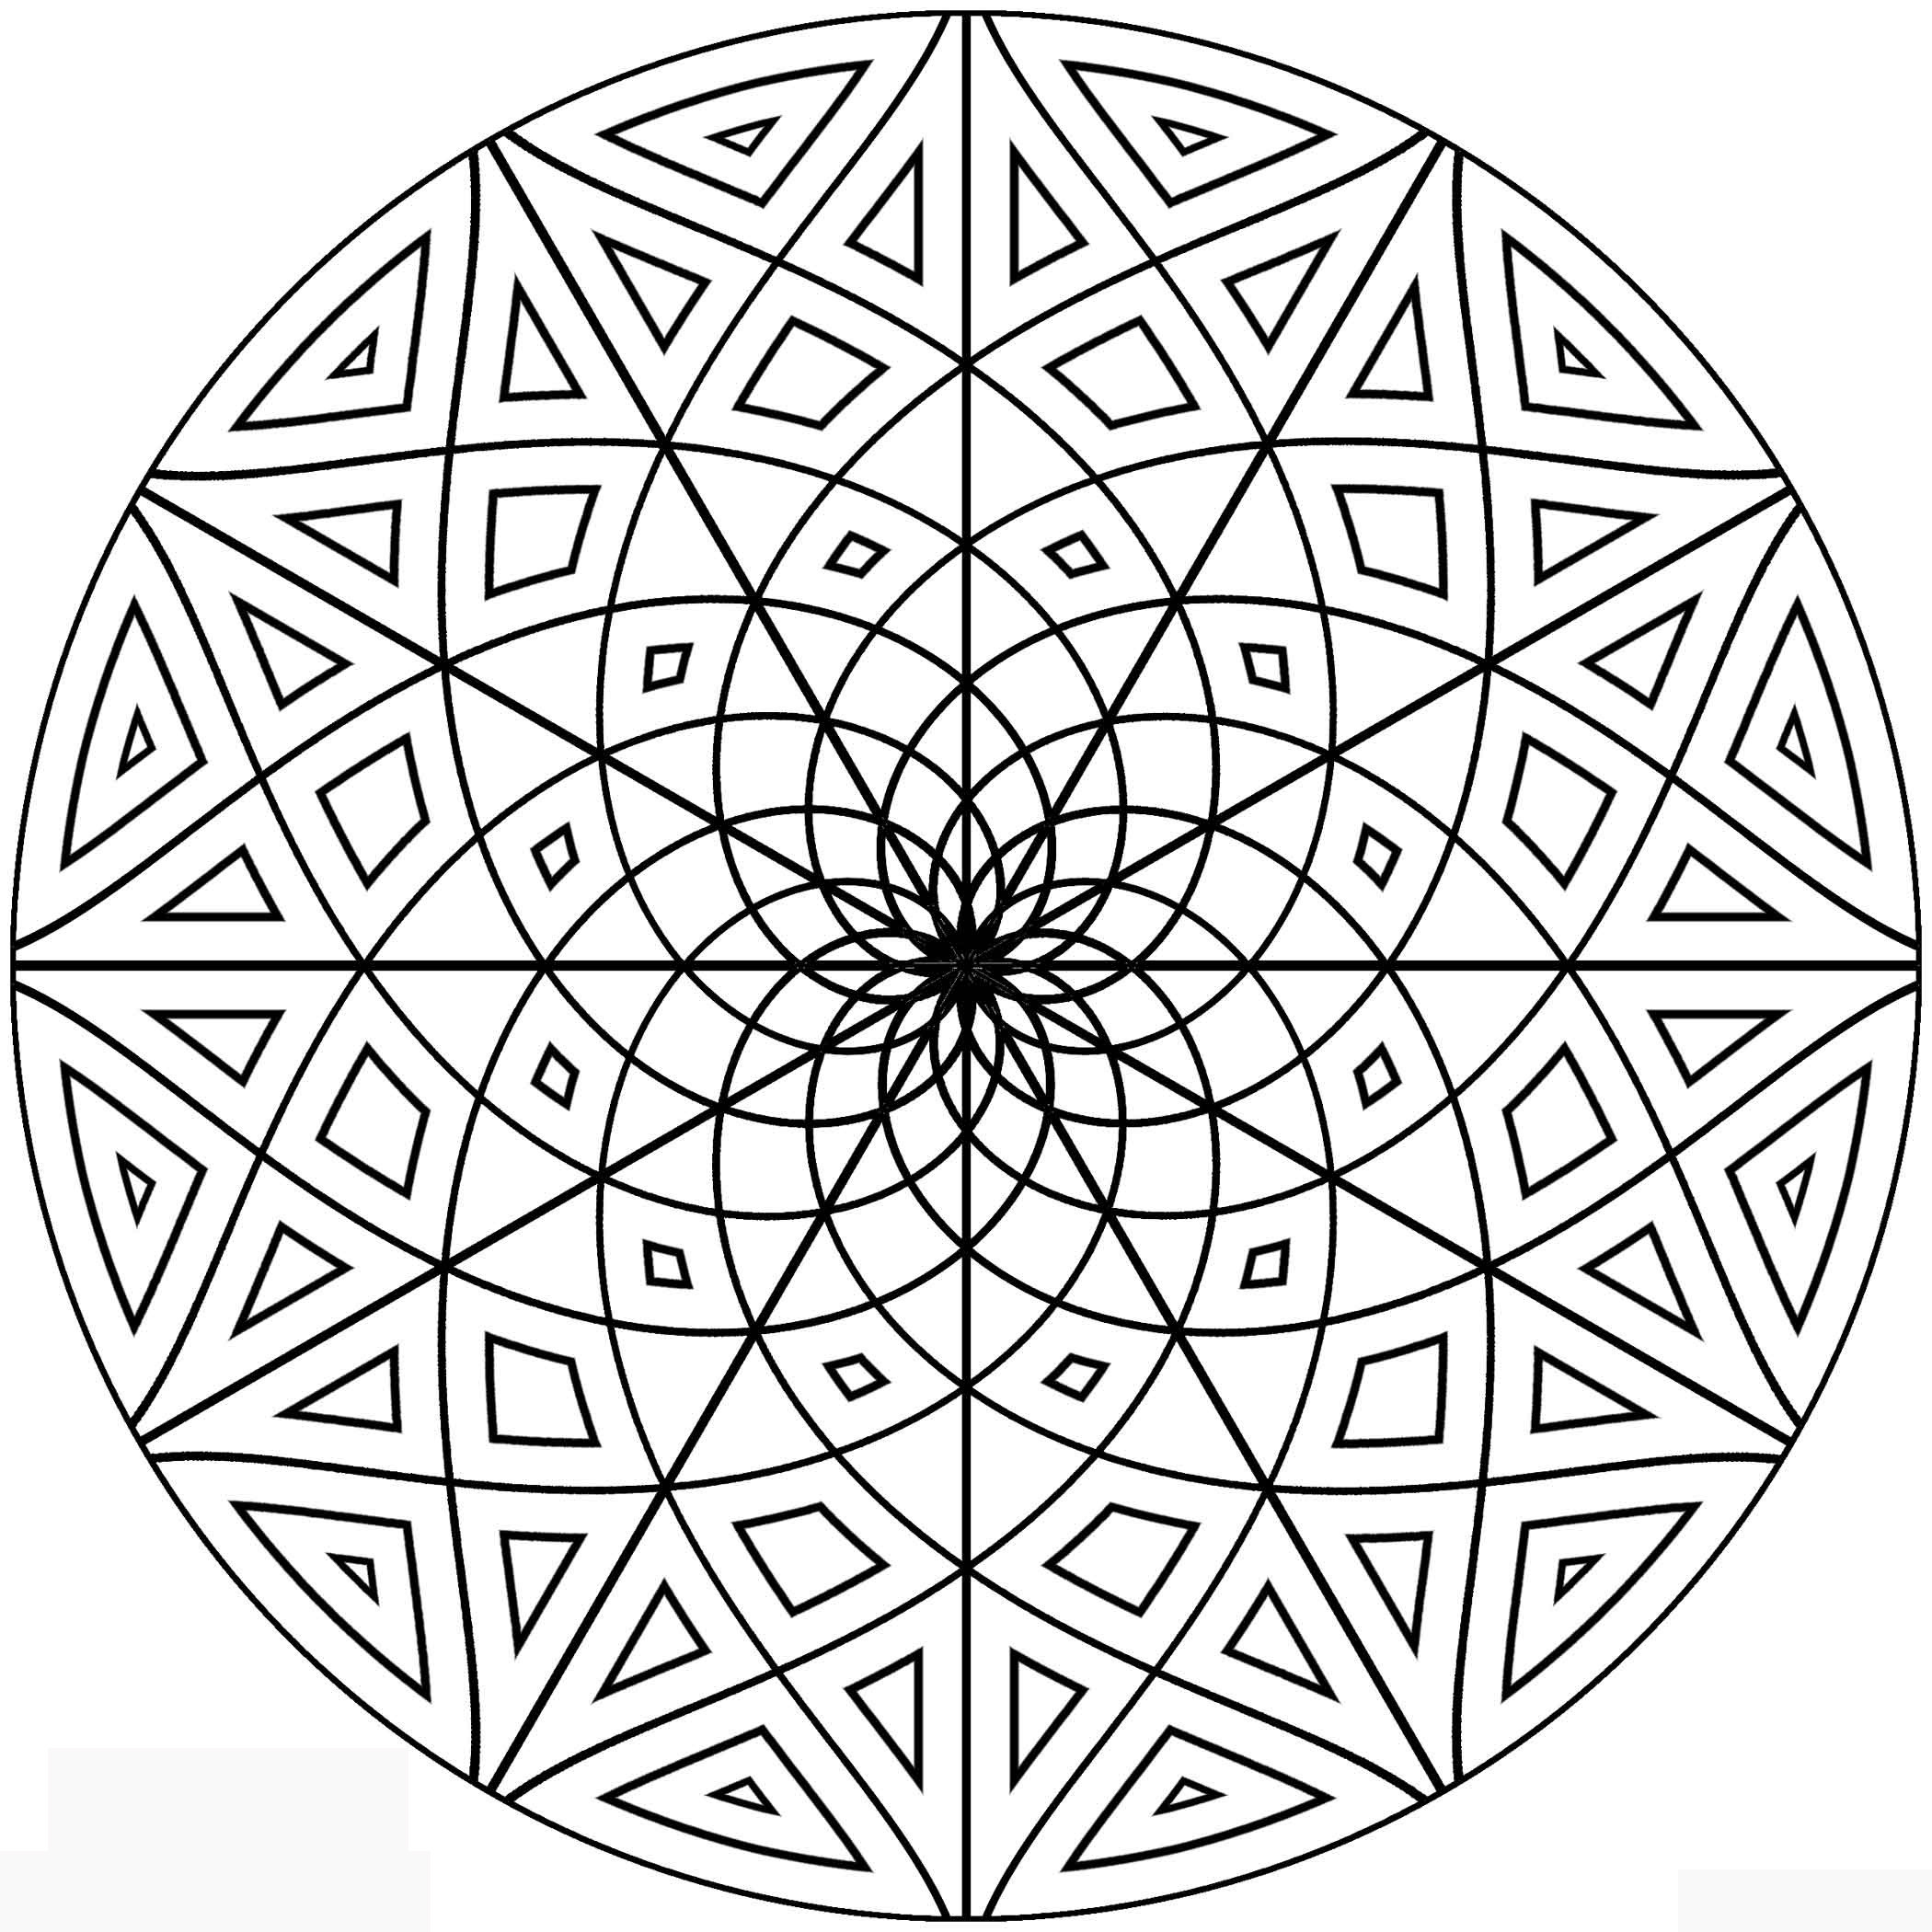 Design Coloring Pages
 Free Printable Geometric Coloring Pages for Adults